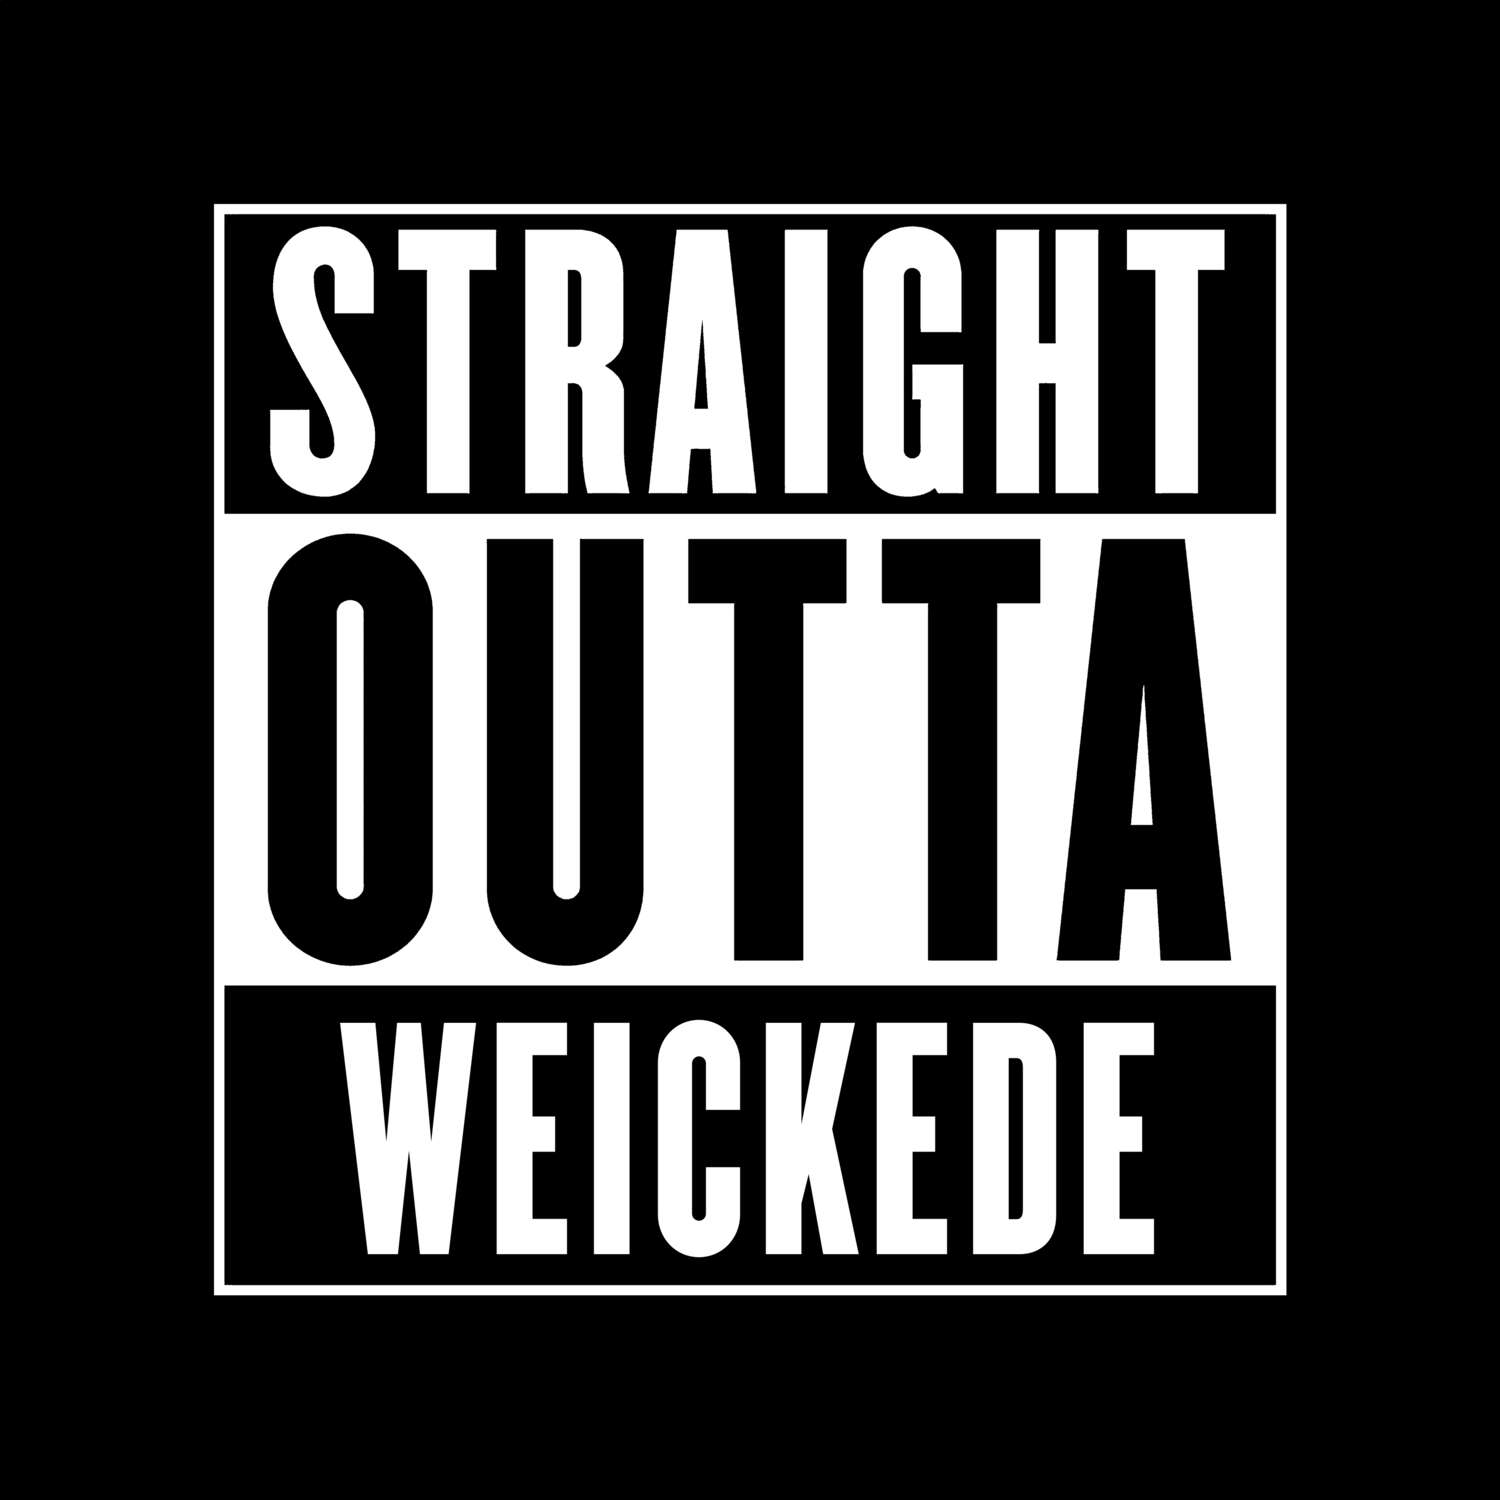 Weickede T-Shirt »Straight Outta«